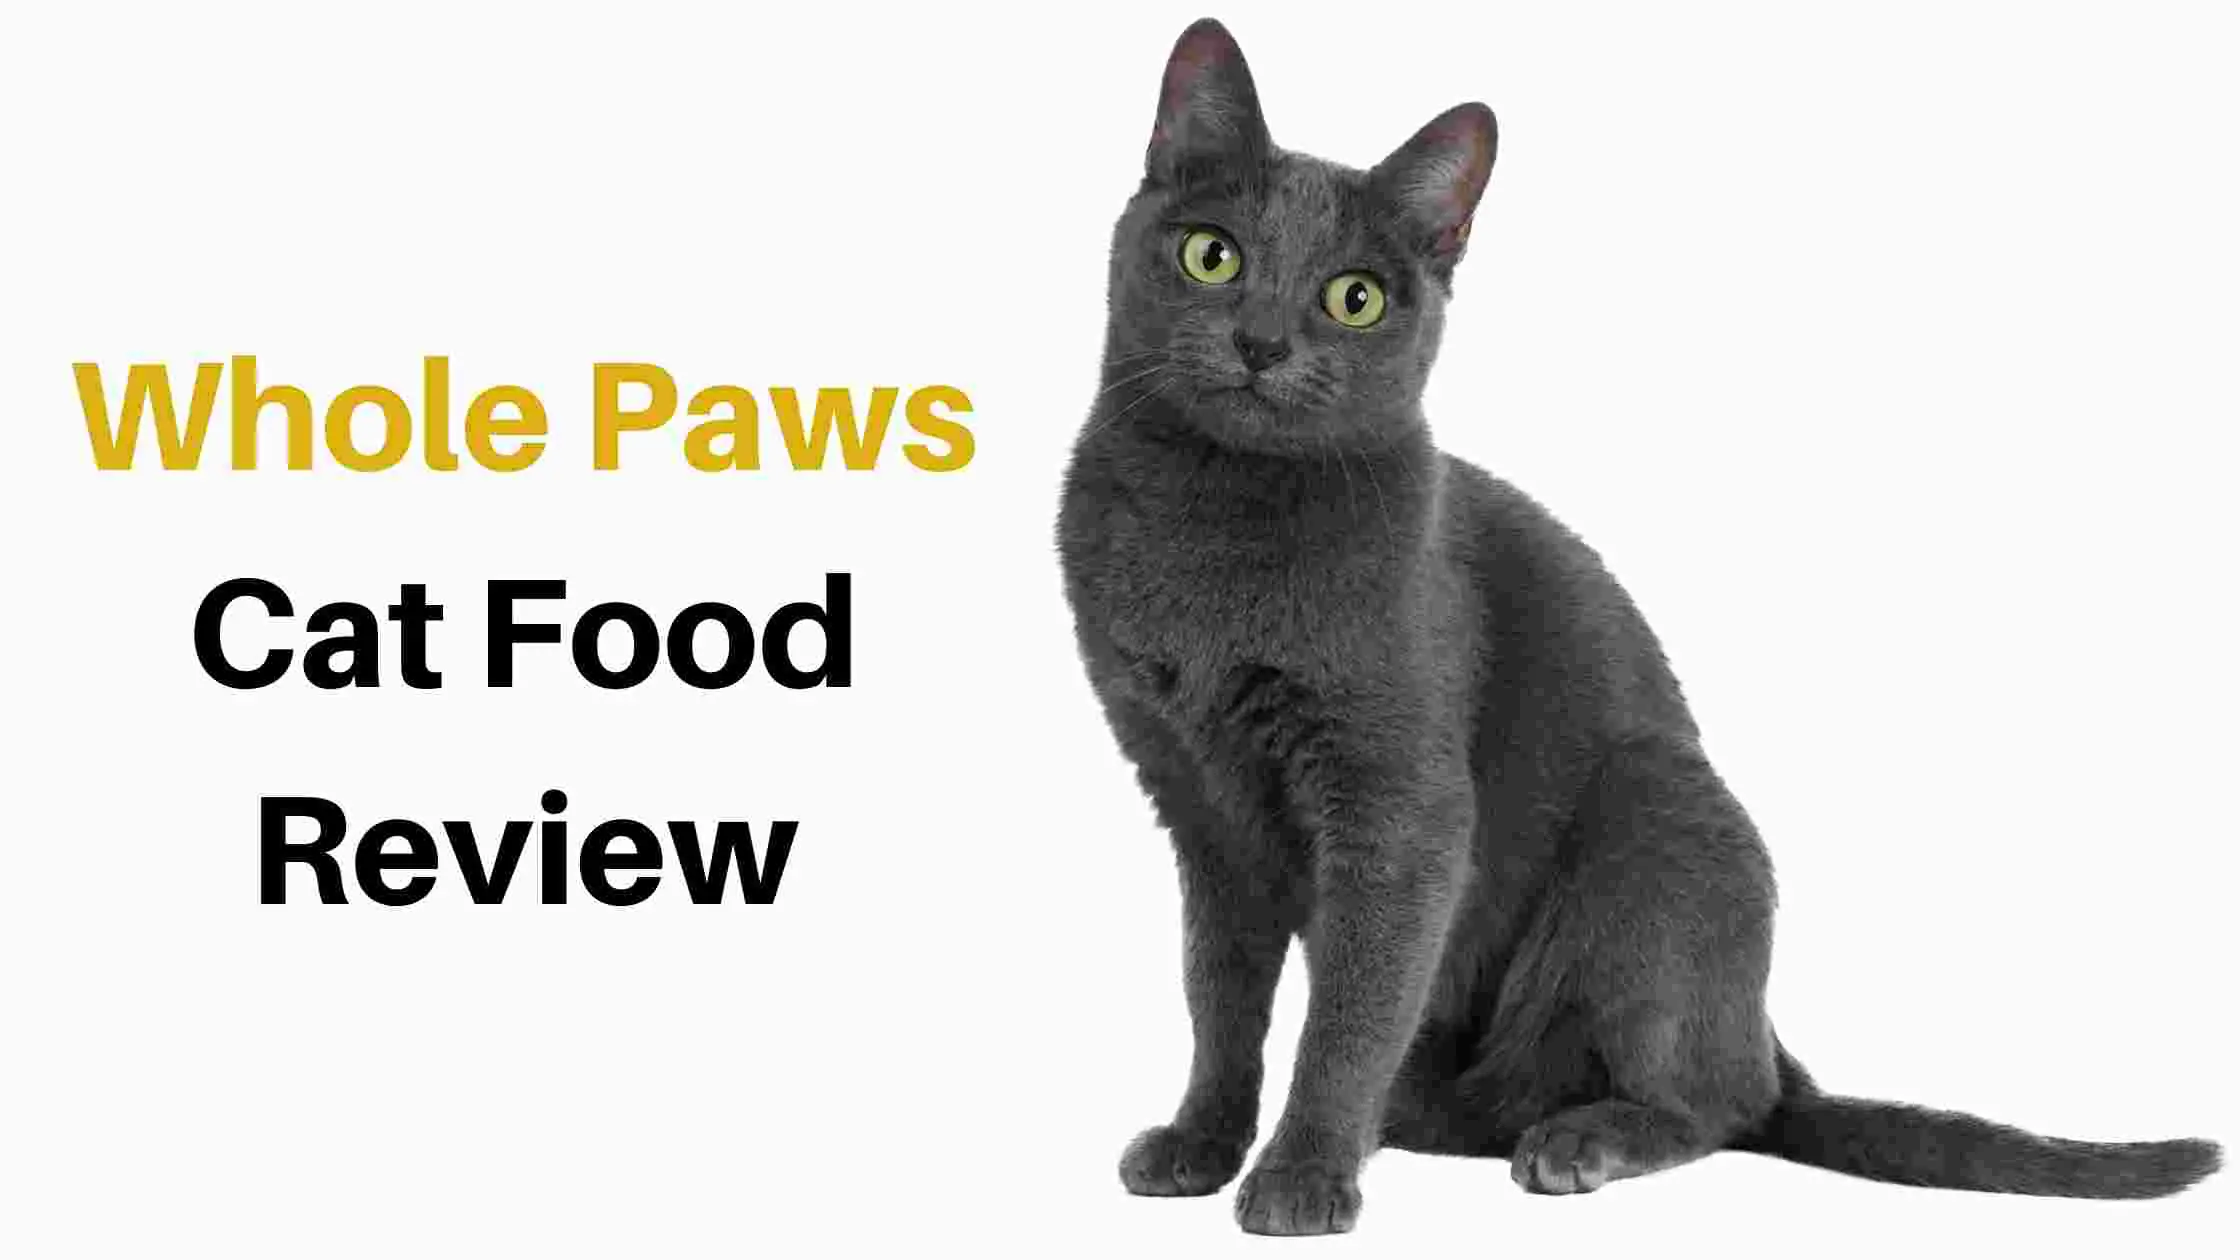 Whole Paws Cat Food Review